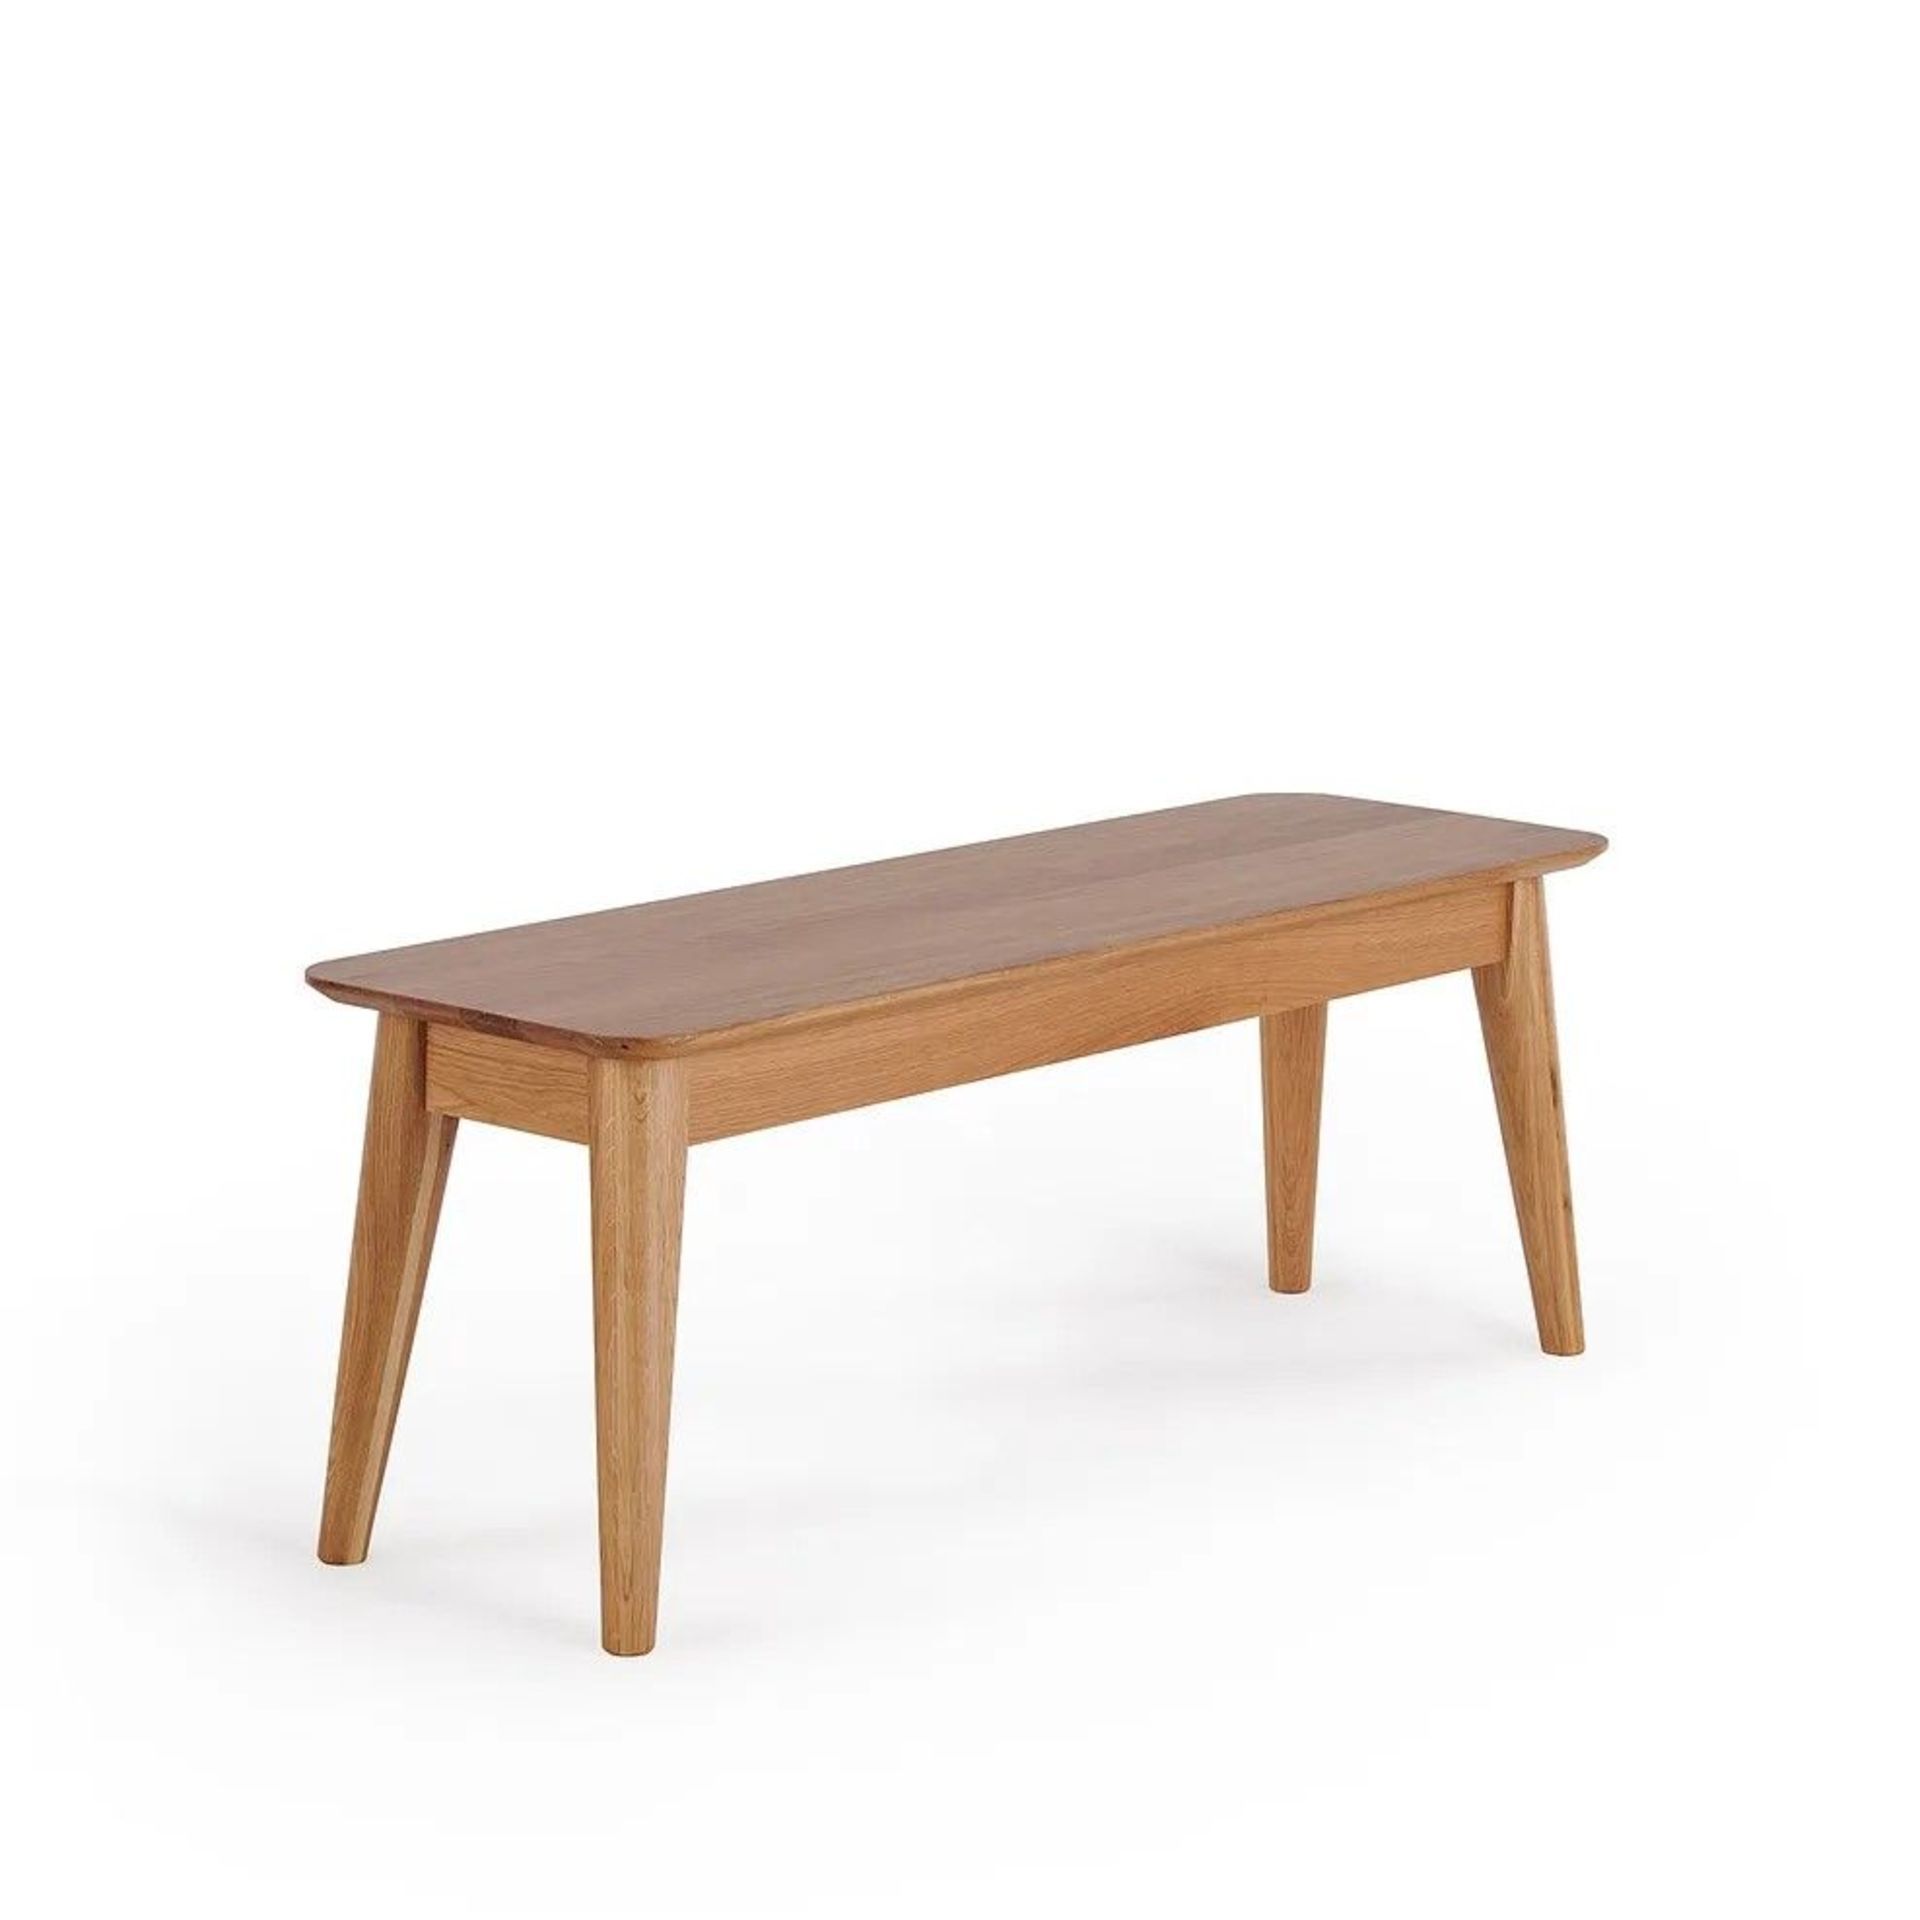 10 x New Boxed - Oscar Natural Solid Oak Bench. 120cm Long. RRP £290 EACH, TOTAL LOT RRP £2,900. For - Image 2 of 2